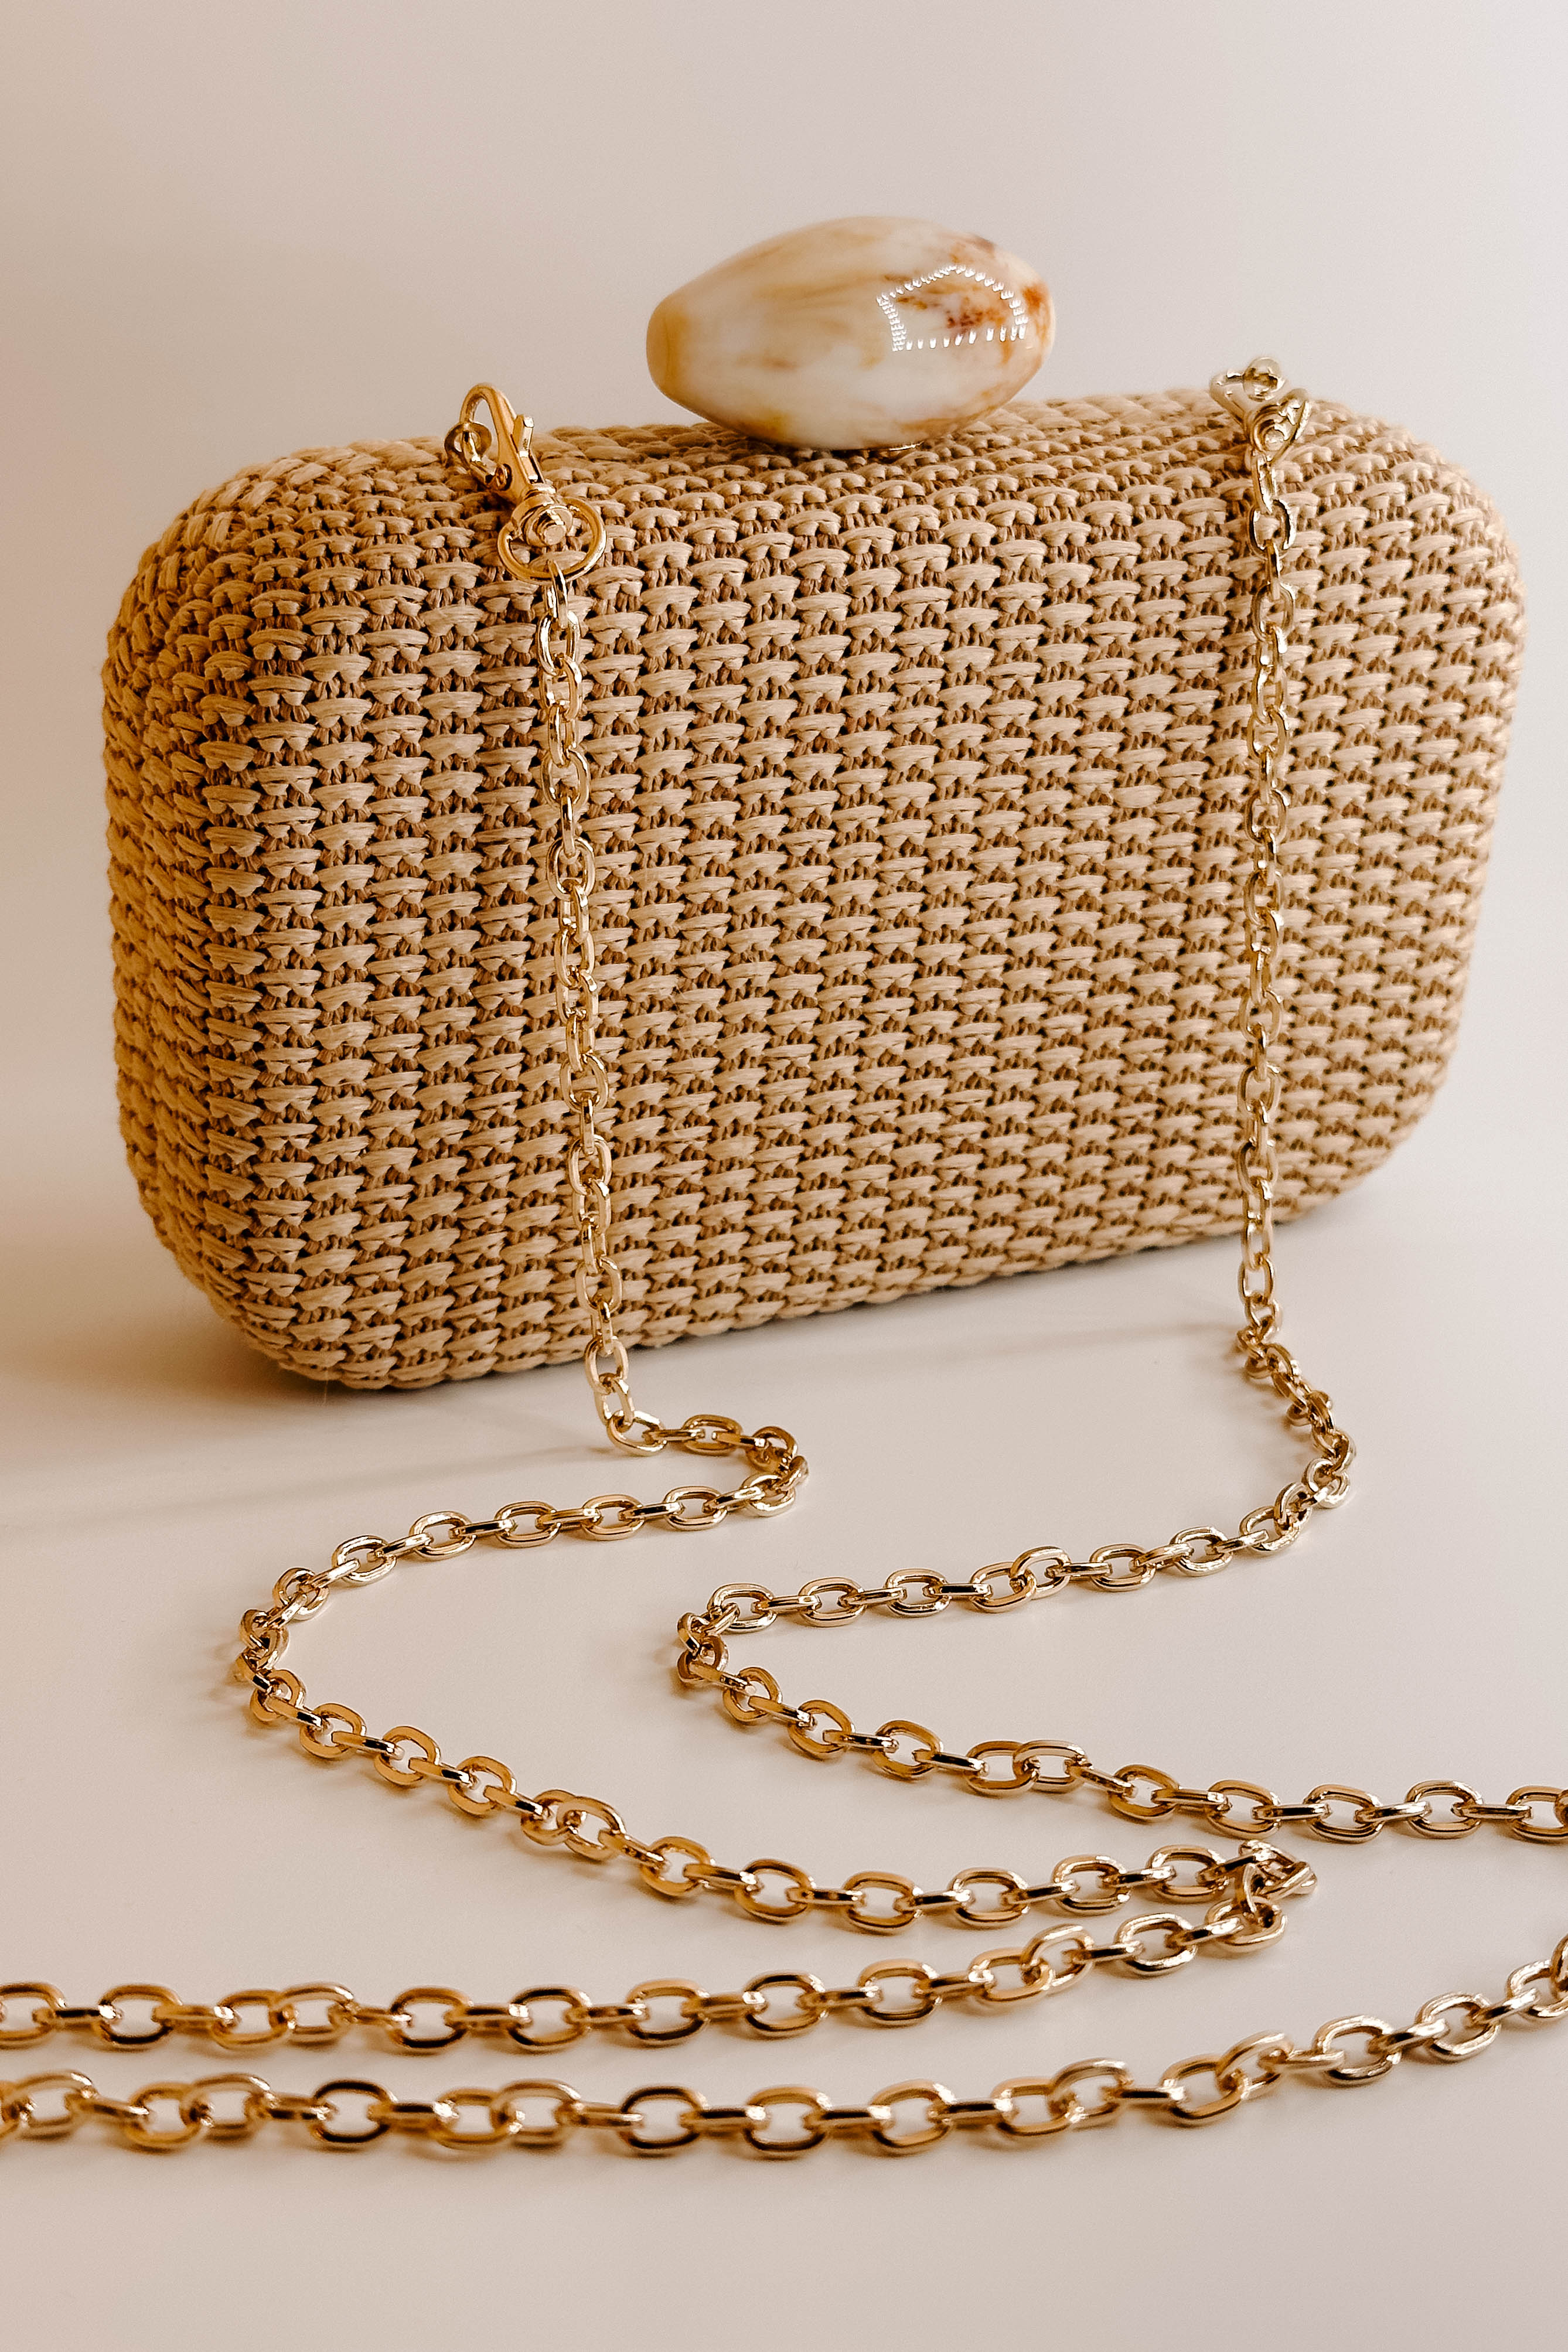 Detailed view of the Frankie Clutch. It features a woven natural texture with an oval pearl closure. On the inside, is a gold chain attachment to be transformed as a crossbody.